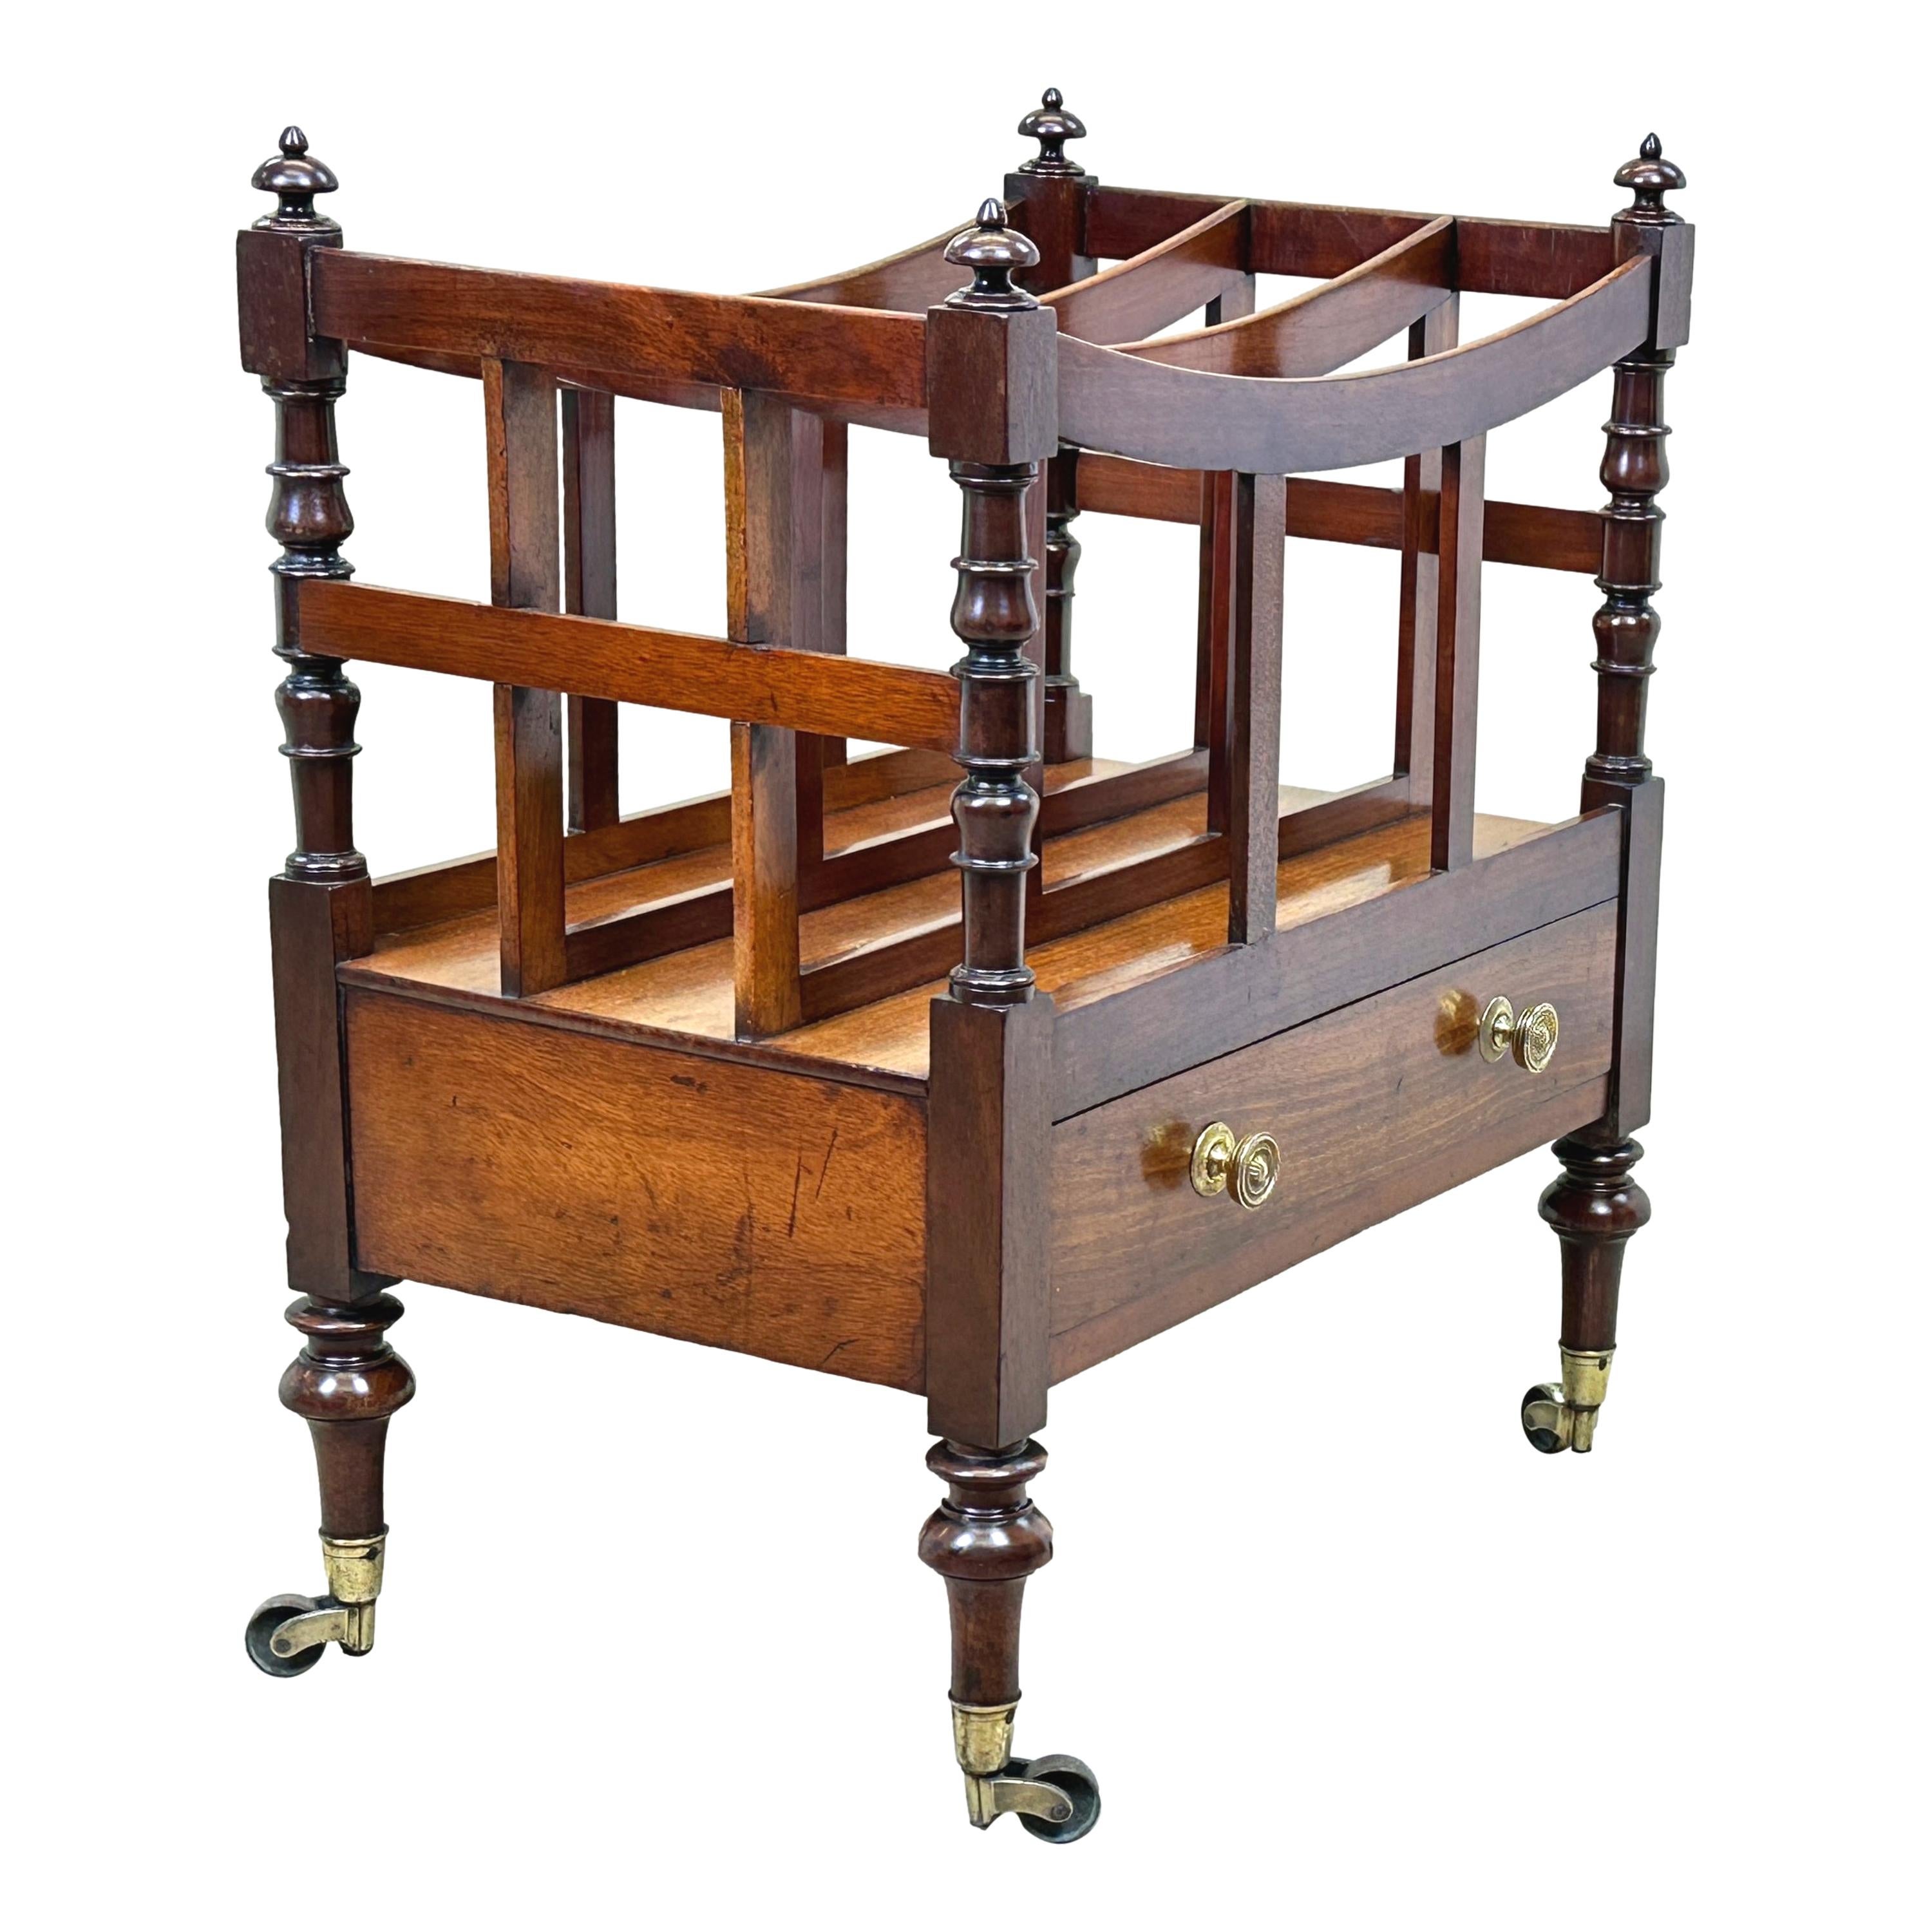 An Exceptional Quality Regency Period, Early 19th Century Mahogany Boat Shaped Canterbury Having Elegant Turned Upright Supports And One Drawer To Frieze, Raised On Tall, Tapering, Turned Legs With Original Brass Castors.

Label To Drawer - 